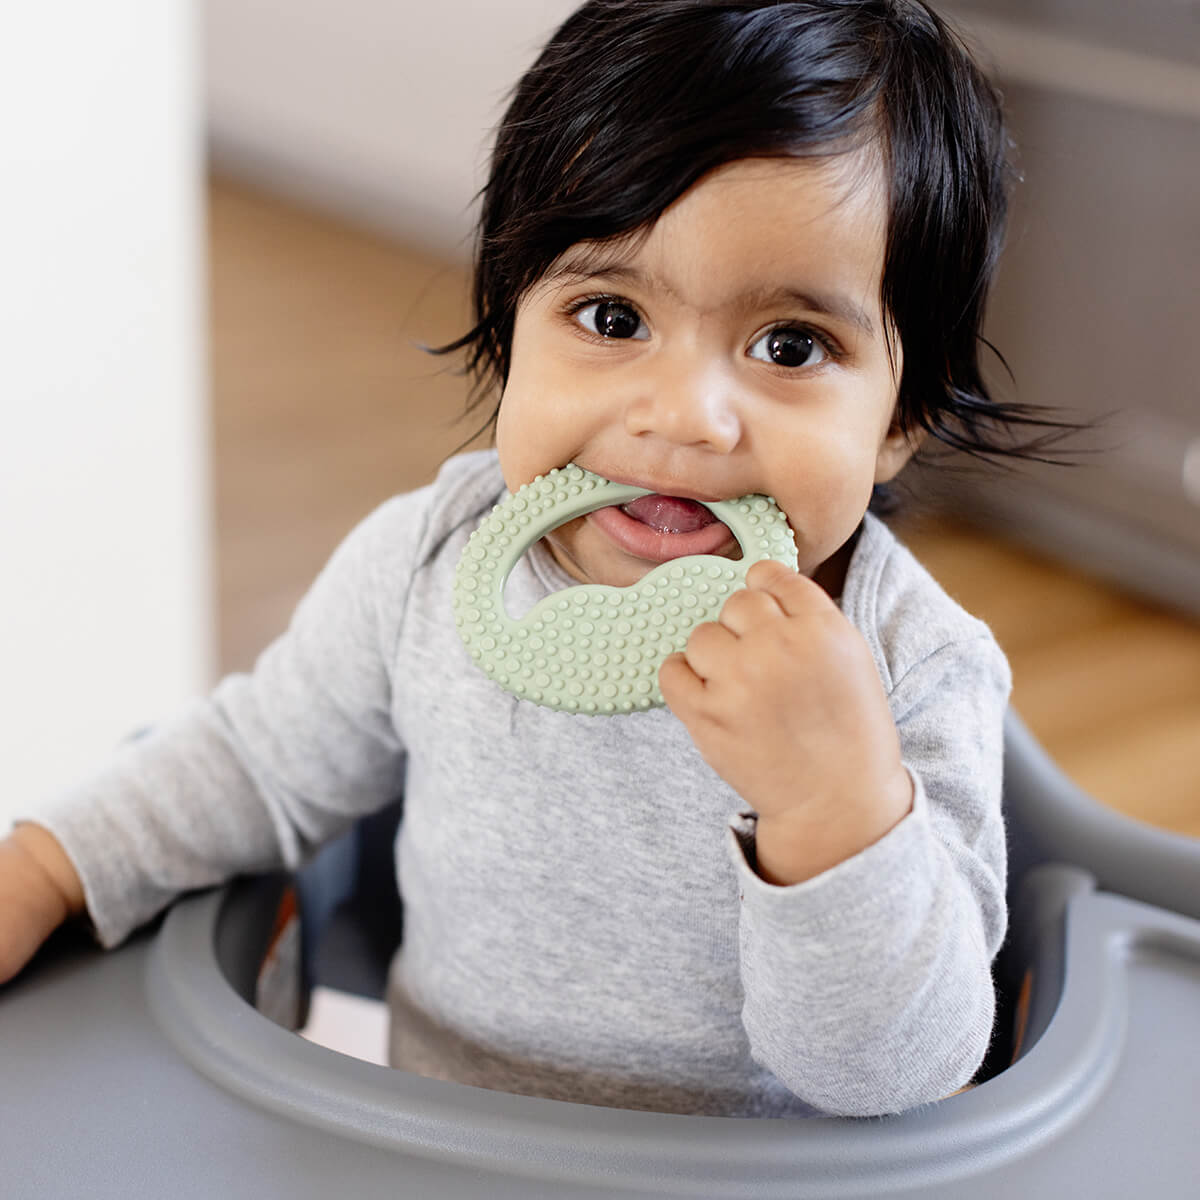 Pre-feeding set by ezpz in sage green includes the tiny pops and oral development tools (silicone teethers)